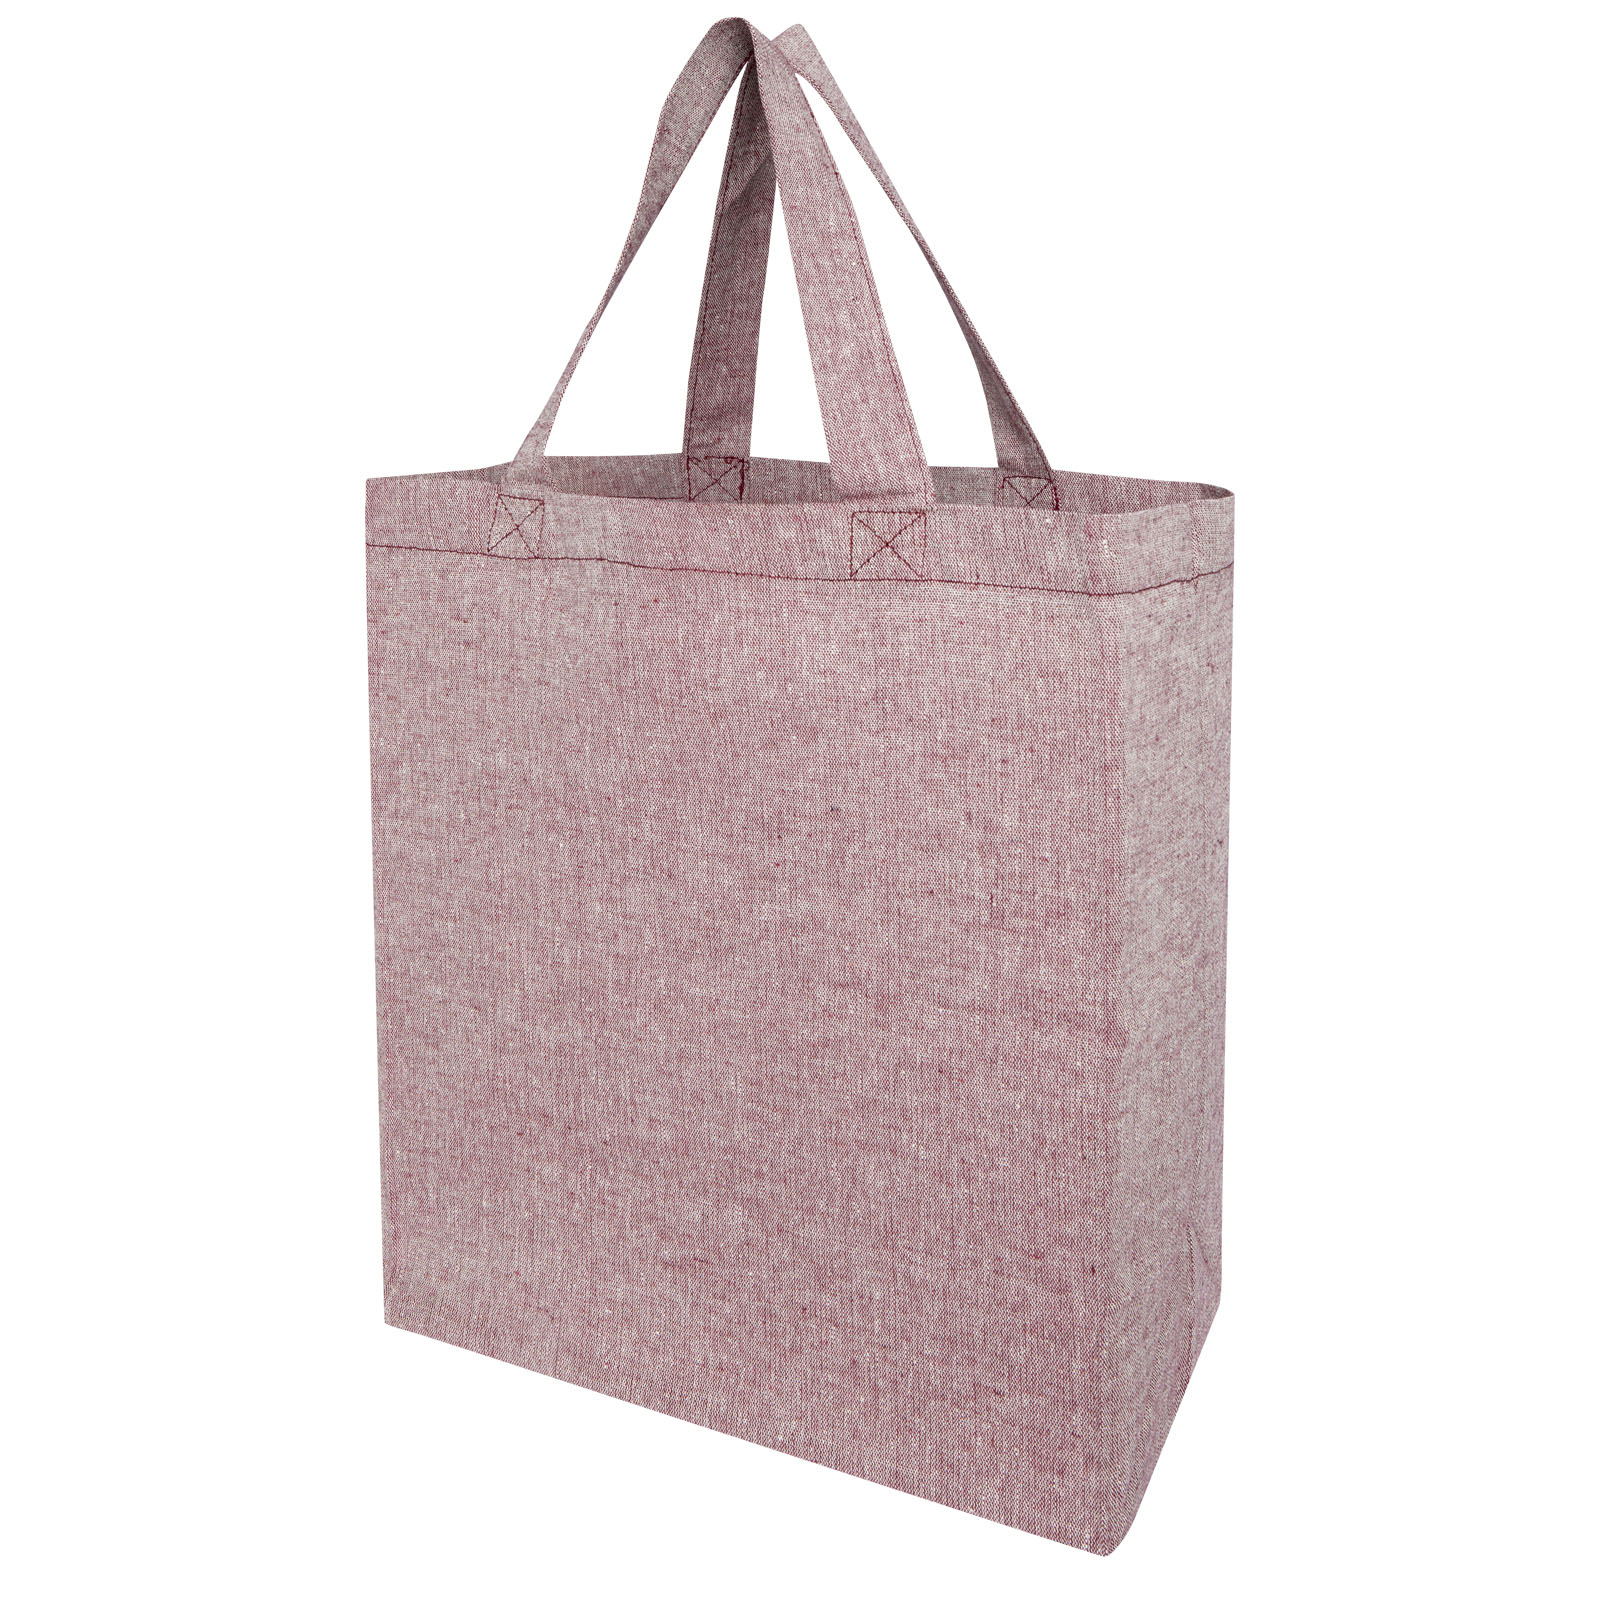 Advertising Shopping & Tote Bags - Pheebs 150 g/m² recycled gusset tote bag 13L - 0